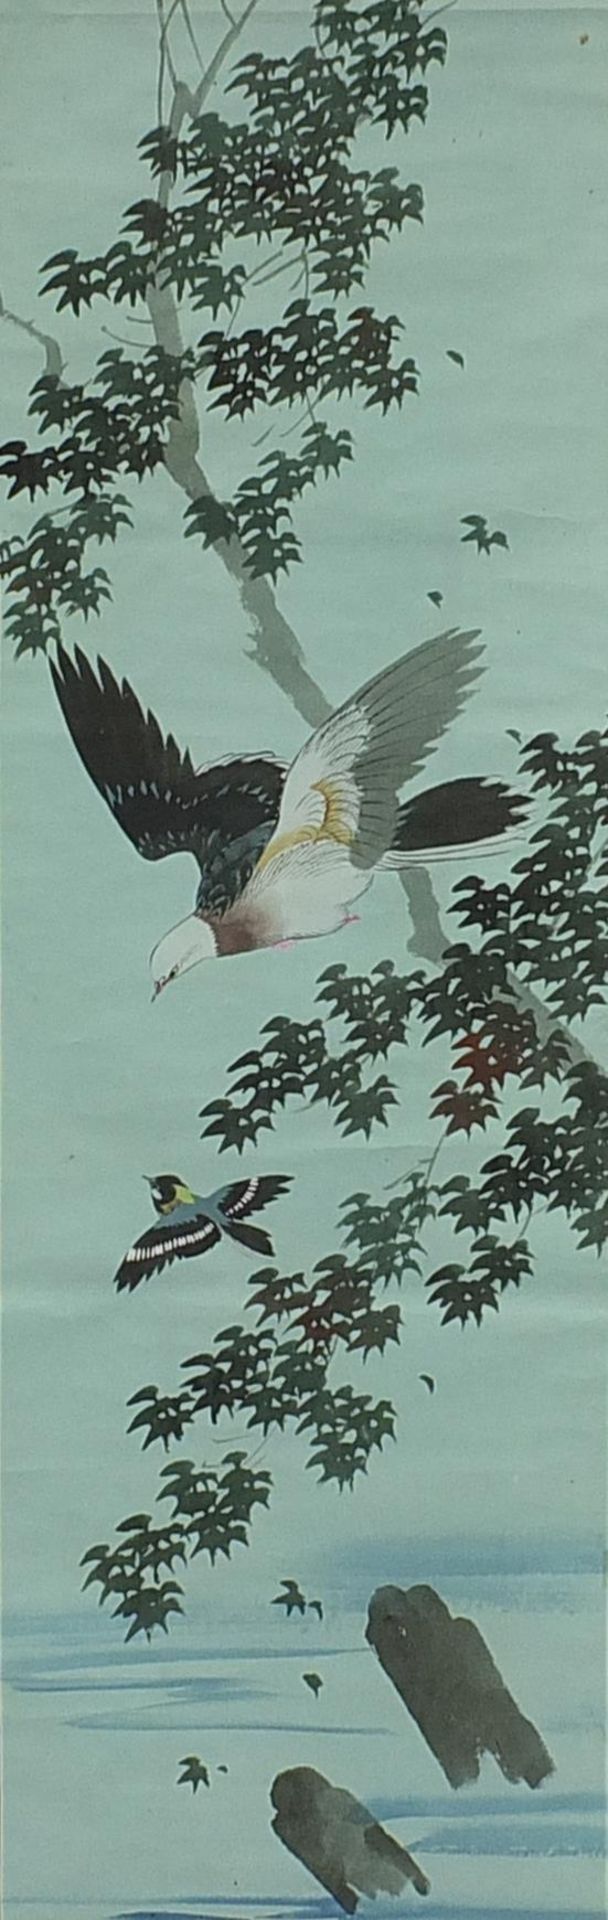 Three Chinese wall hanging scrolls hand painted with birds - Image 6 of 13